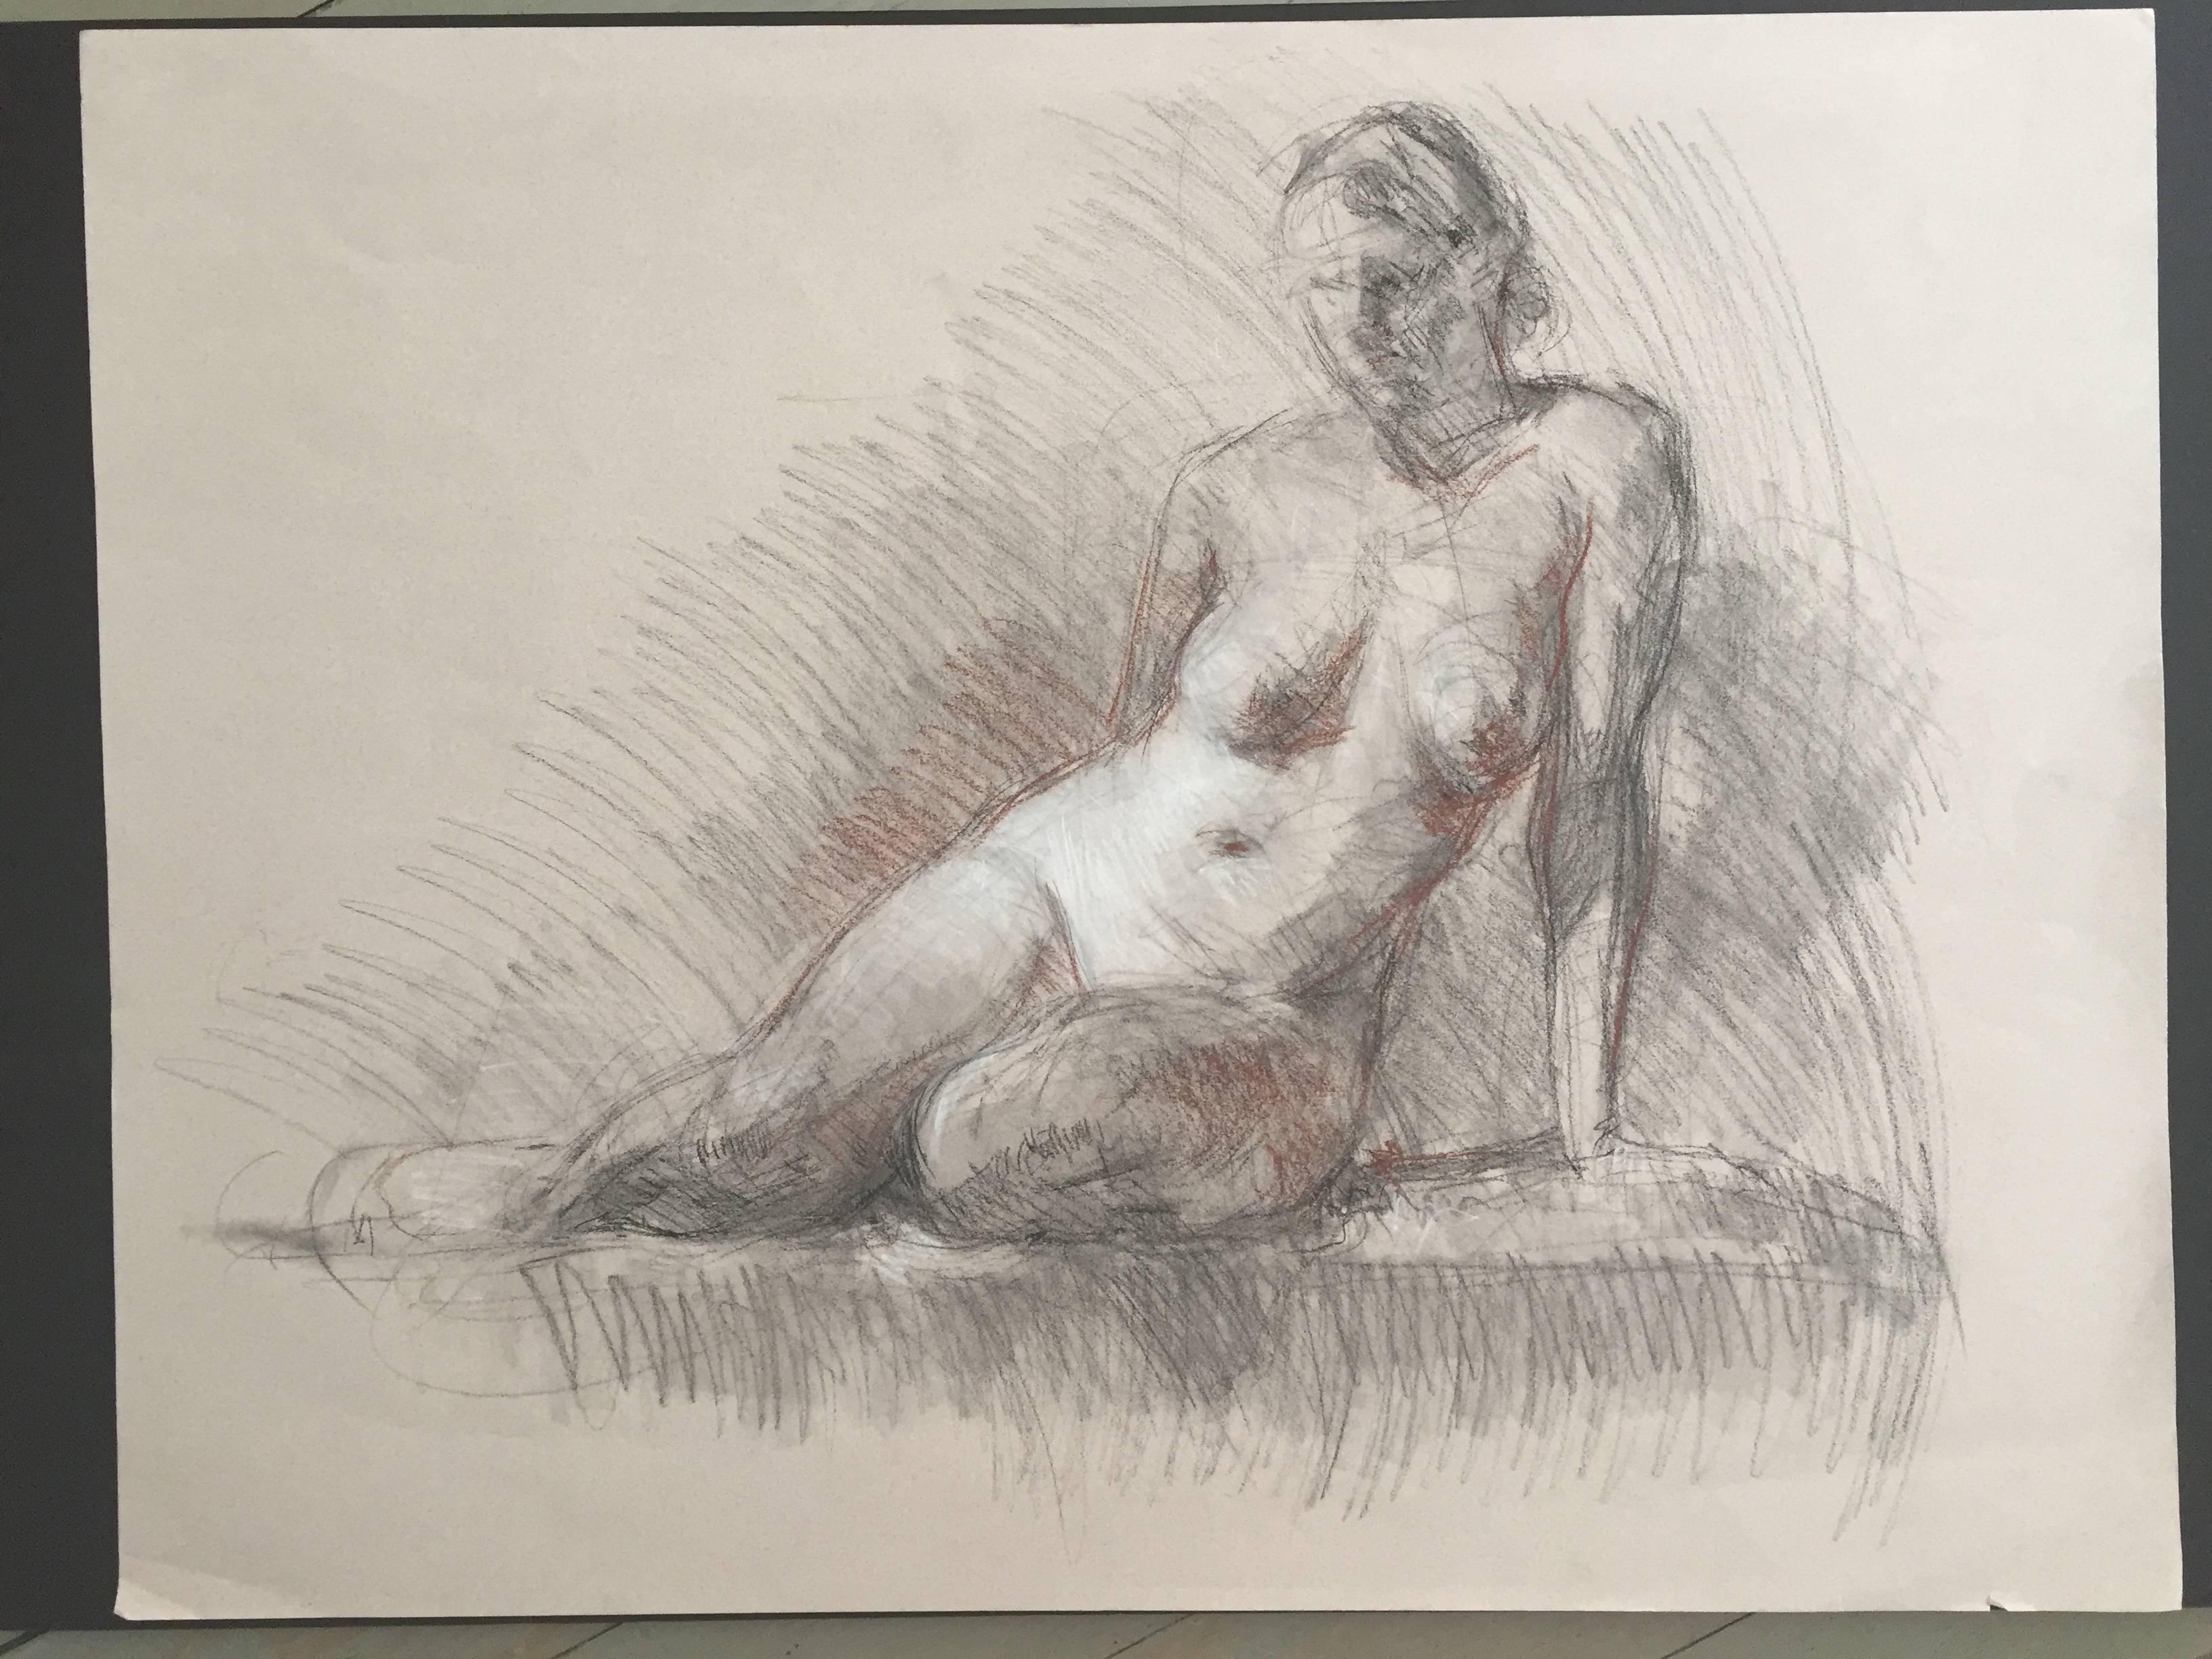 An academic drawing of a female figure, sitting atop a flat surface. Sitting on one leg, the other bent and outstretched. Fenske highlights the lines of the figure with a burnt orange color, and the illuminated stomach with white chalk. A truly